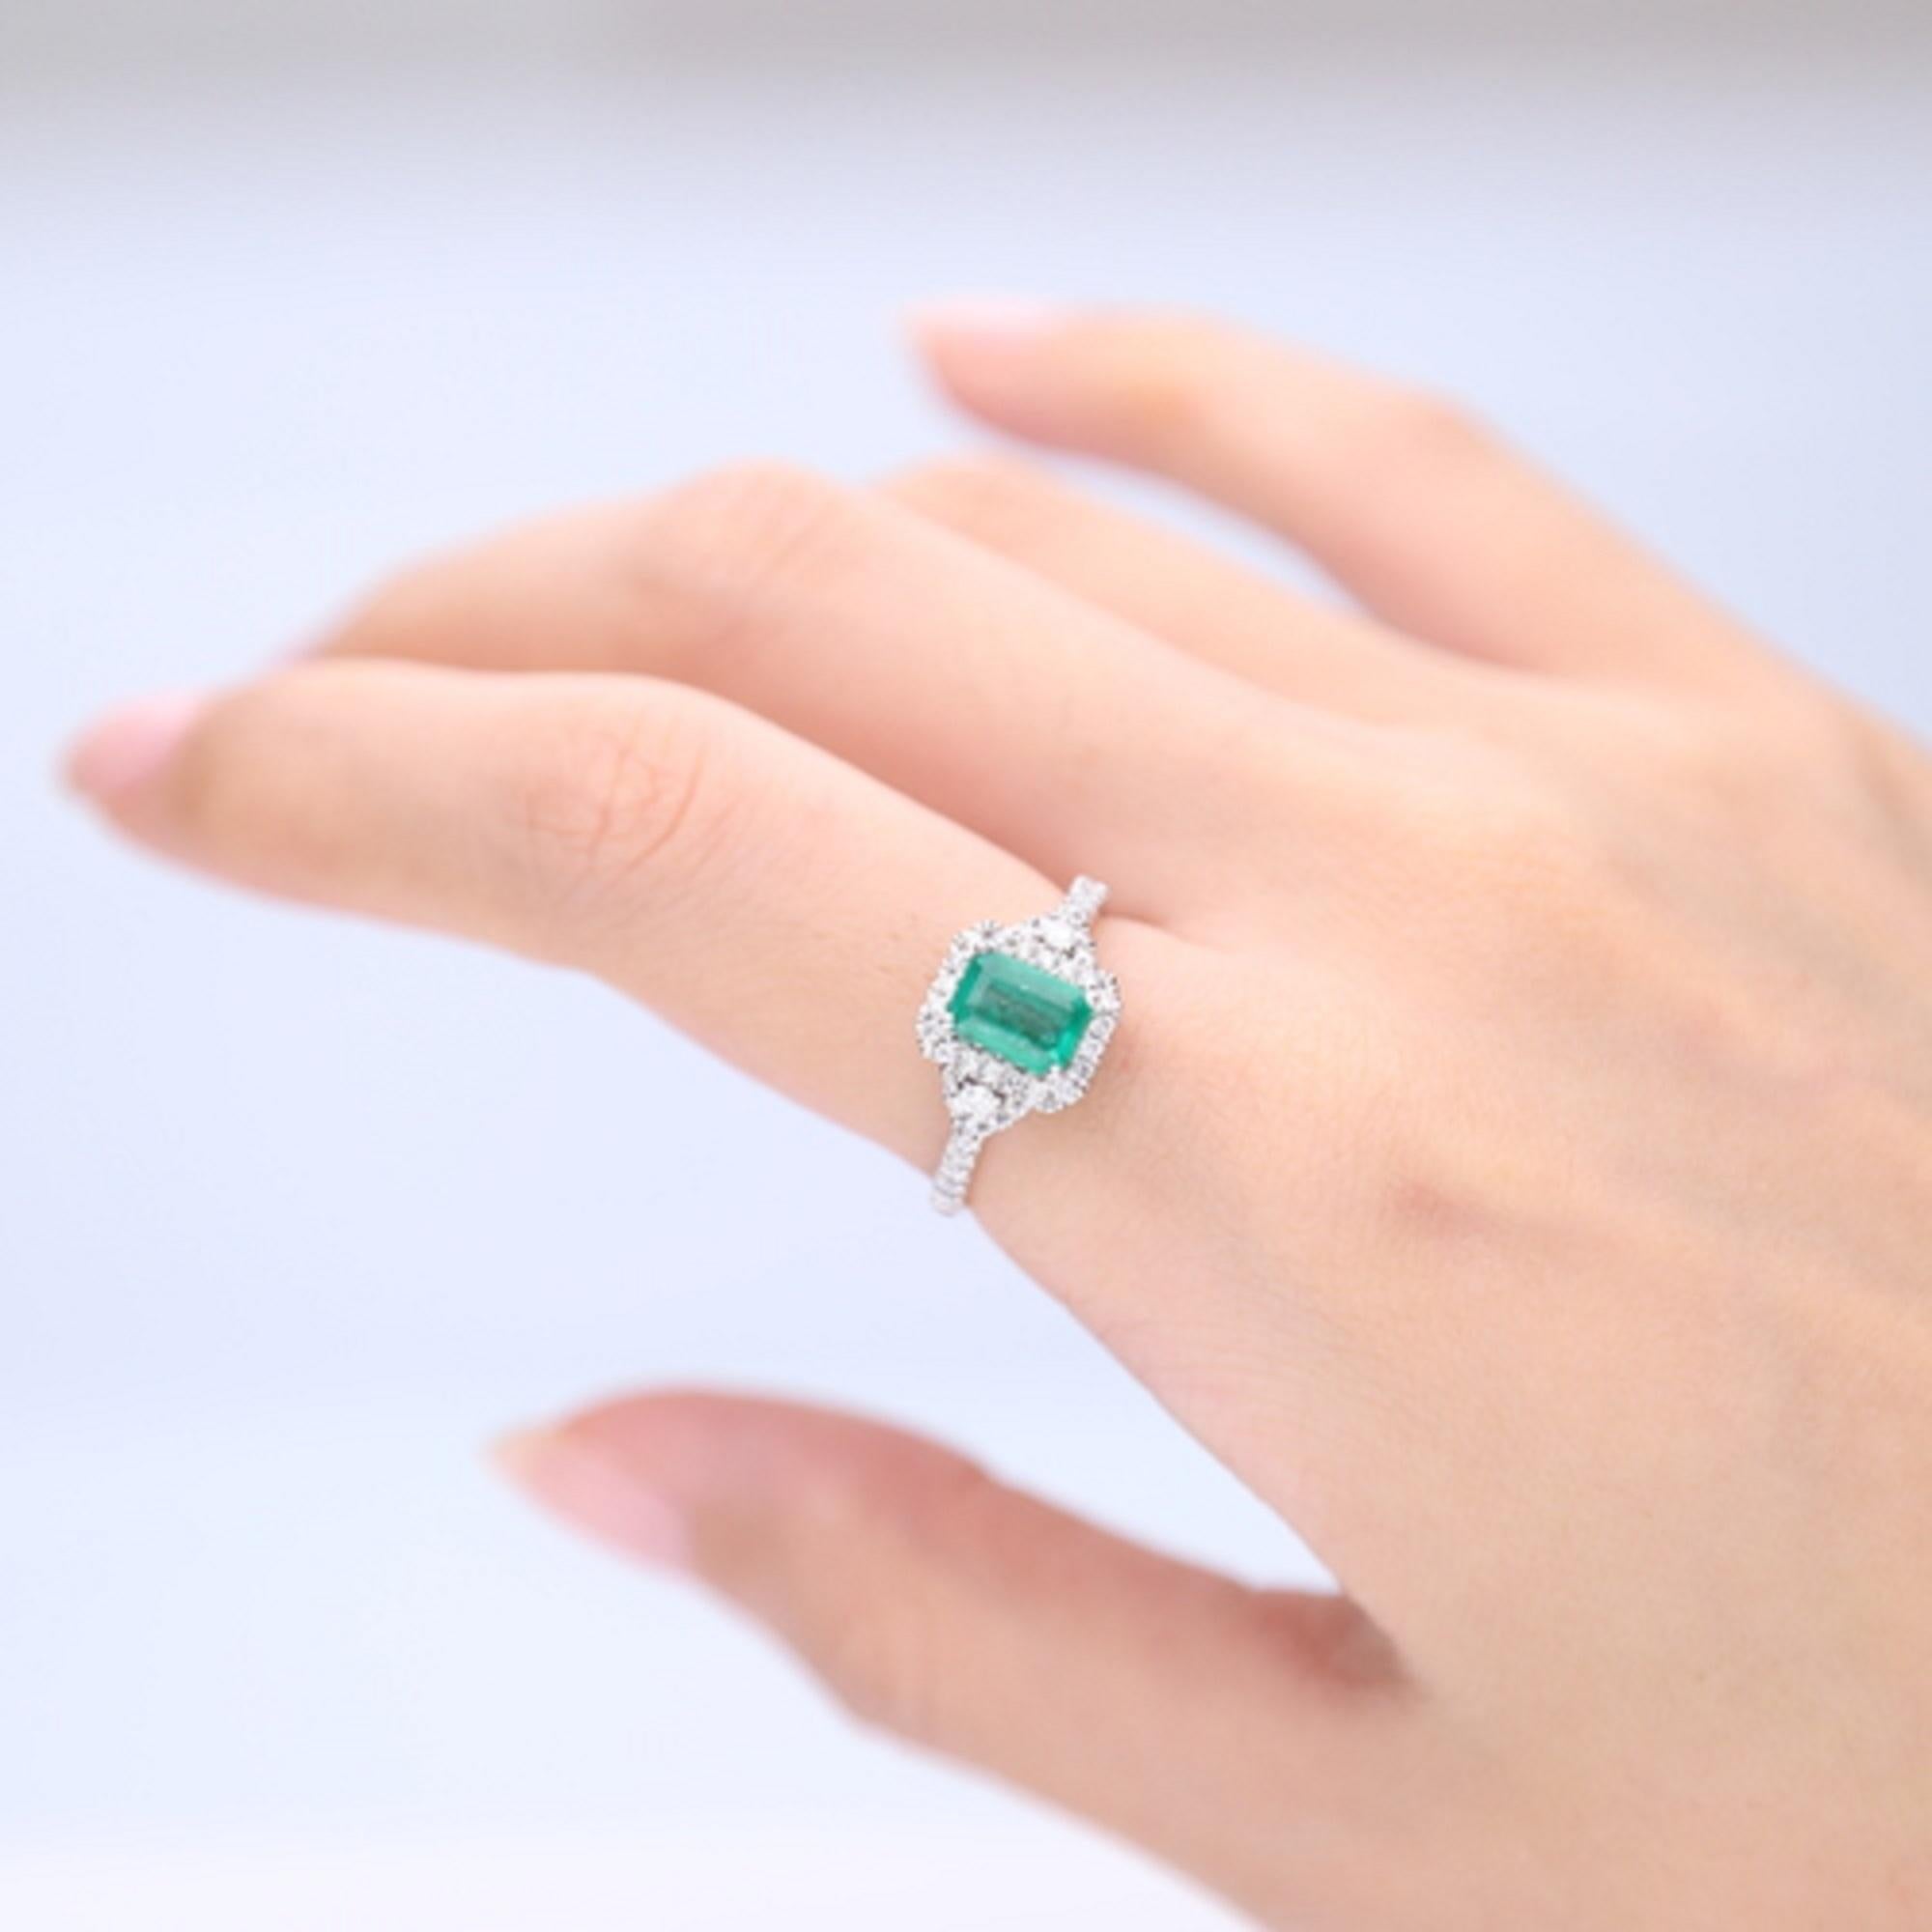 Stunning, timeless and classy eternity Unique Ring. Decorate yourself in luxury with this Gin & Grace Ring. The 14k White Gold jewelry boasts Emerald cut Prong Setting Natural Zambian Emerald (1 pcs) 0.98 Carat, along with Natural Round cut white